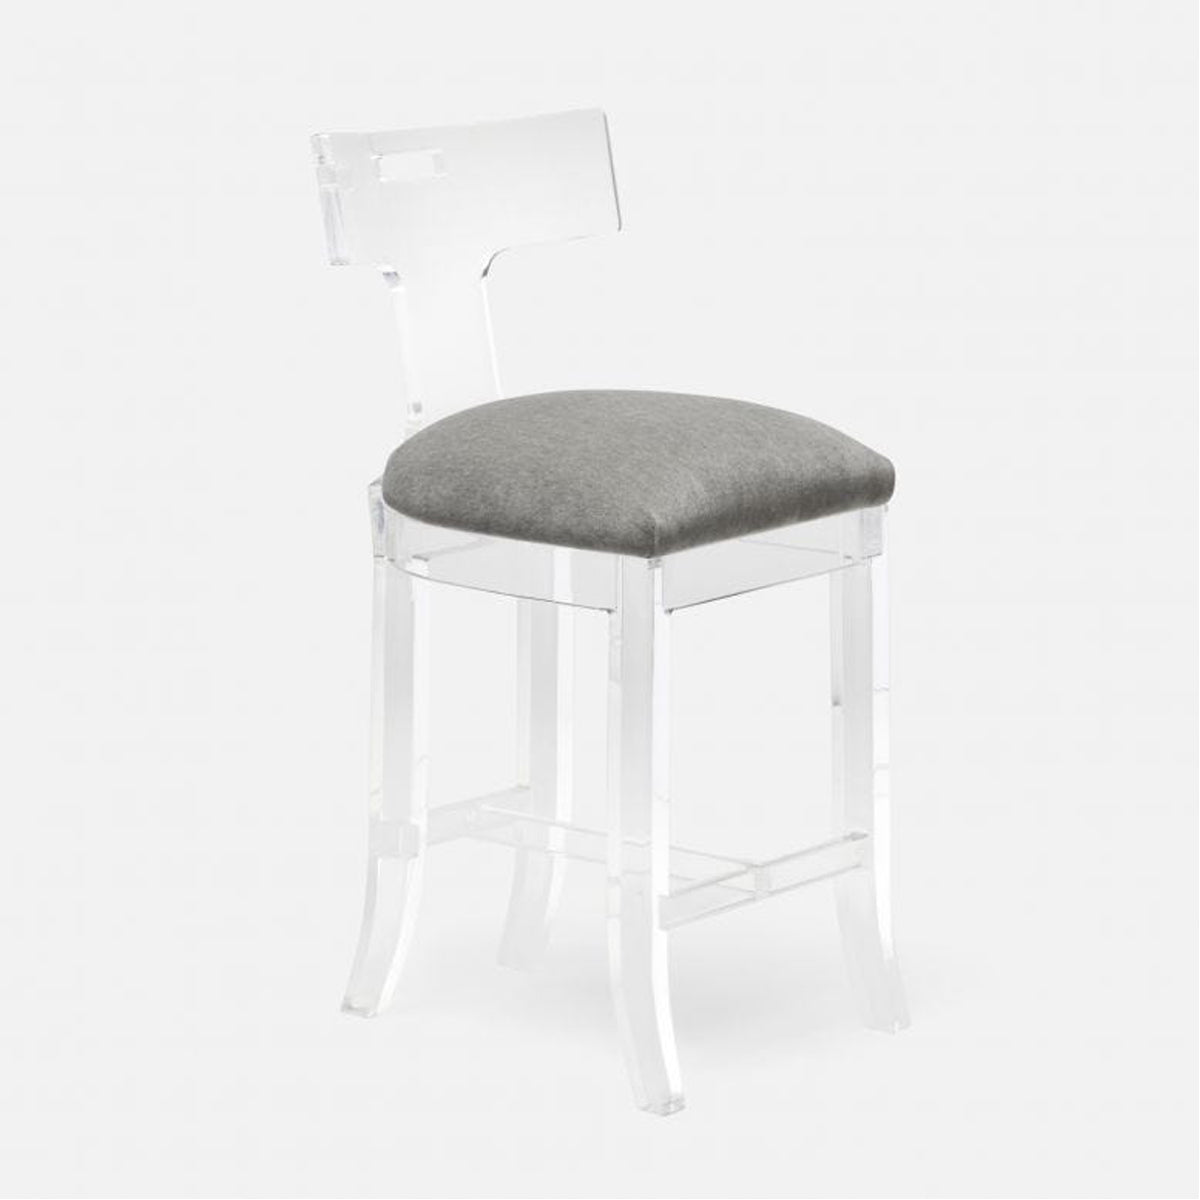 Made Goods Aldercy Clear Acrylic Counter Stool in Brenta Cotton/Jute